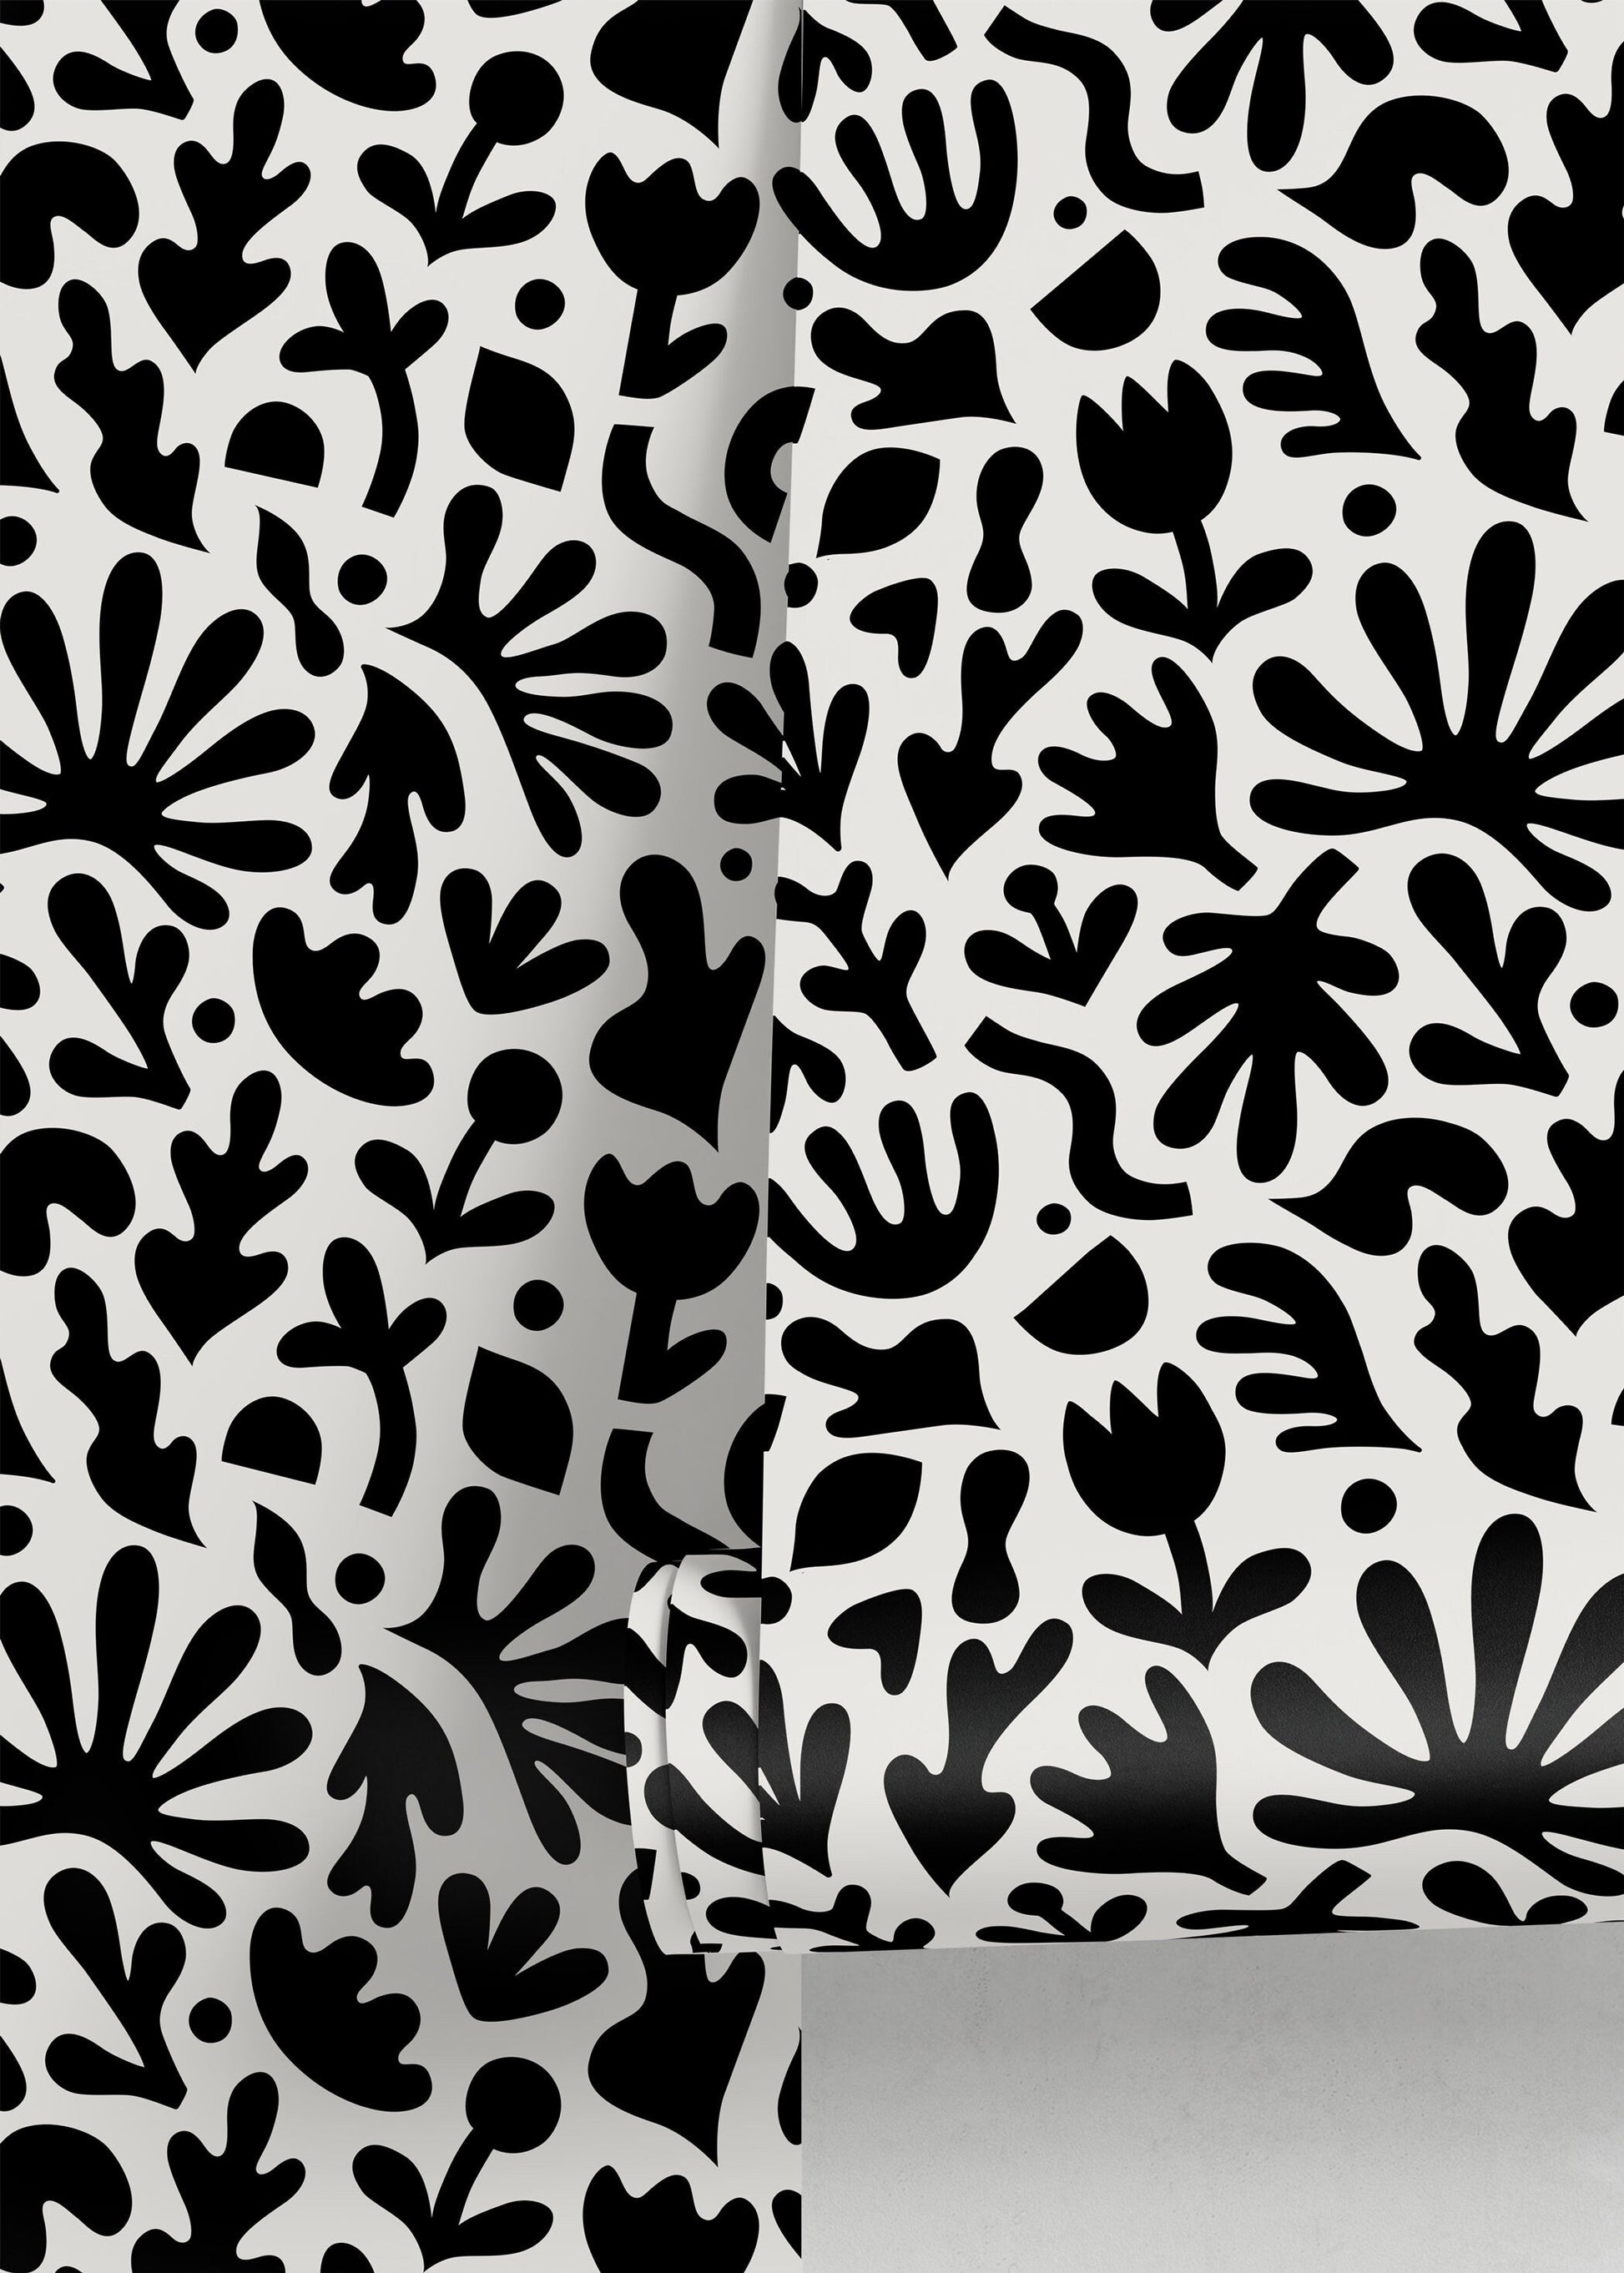 Abstract Black And White Flowers Removable Wallpaper Wall Decor Home Decor Wall Art Printable Wall Art Room Decor Wall Prints Wall Hanging - B909